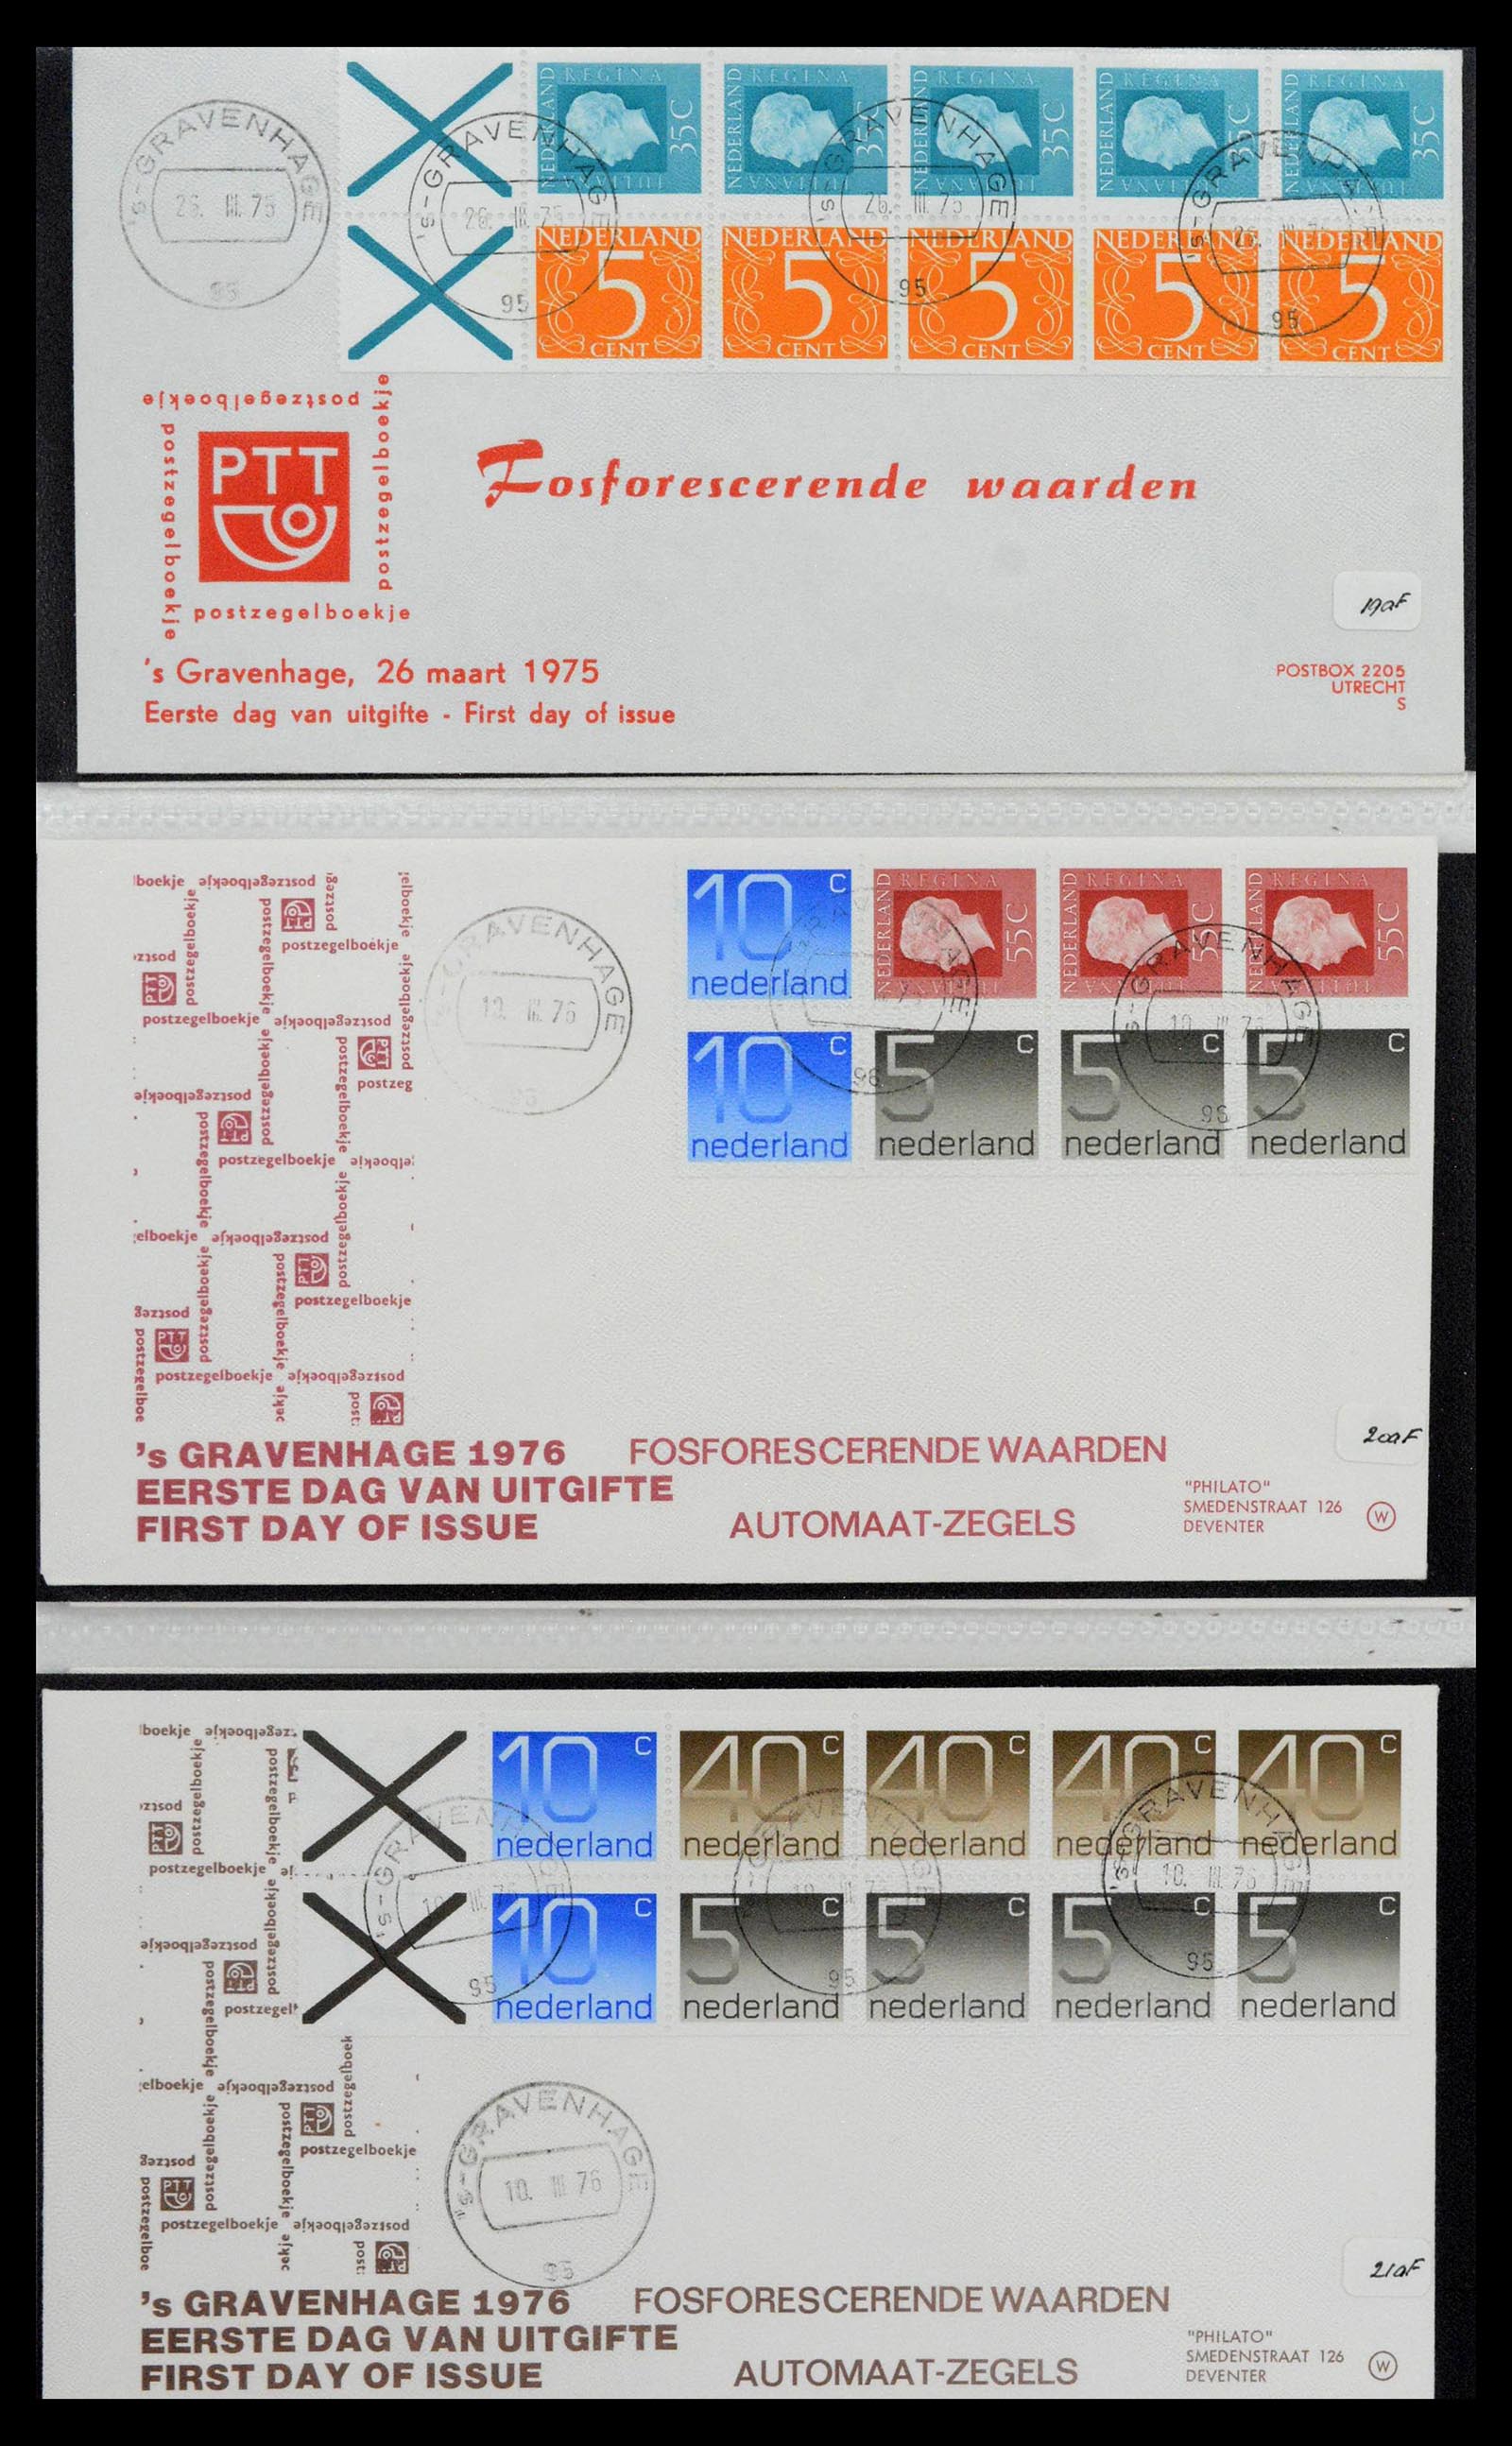 38559 0070 - Stamp collection 38559 Netherlands special first day covers.